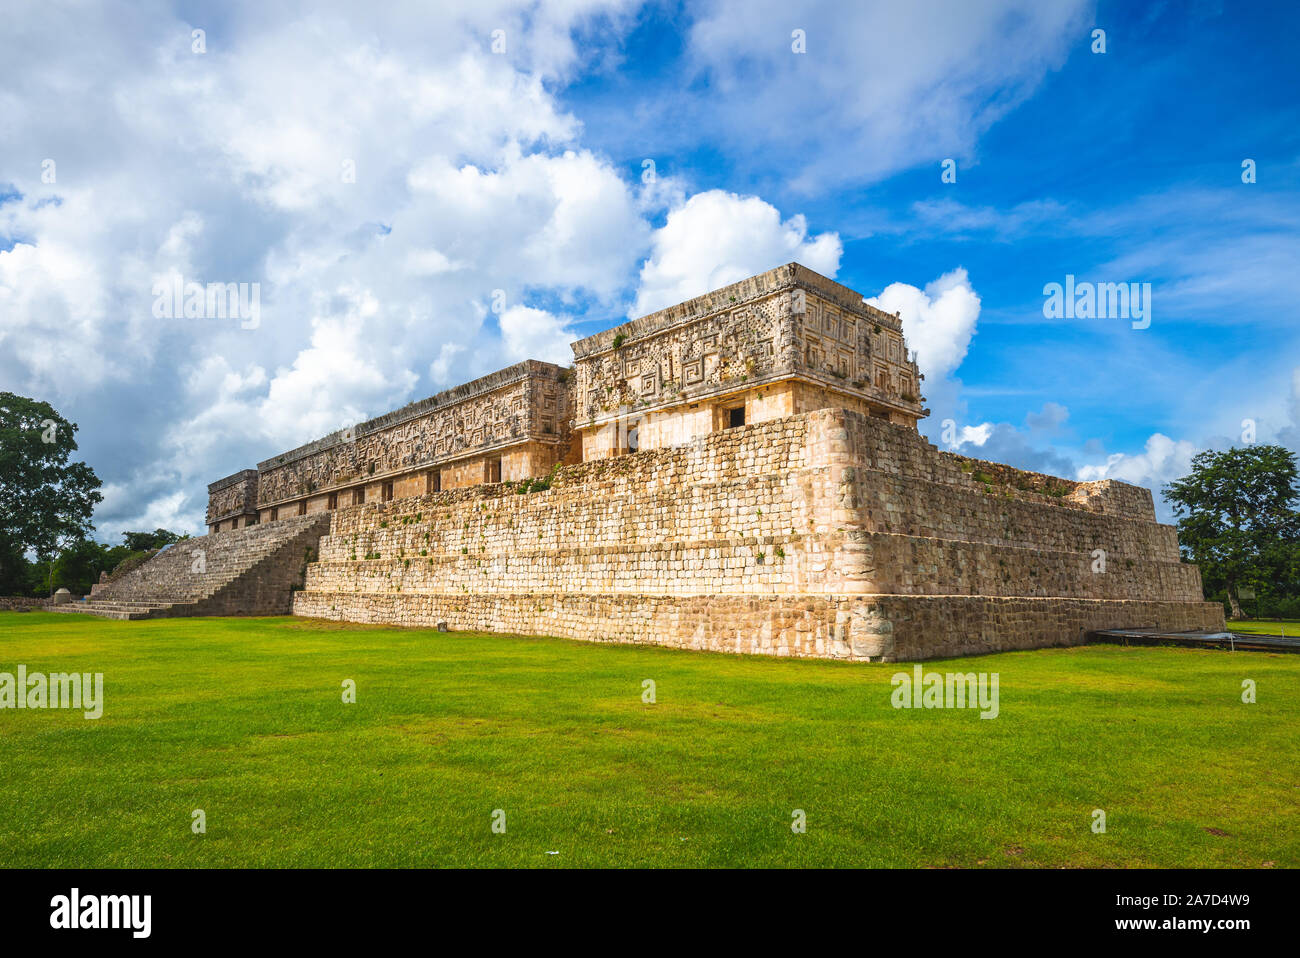 Facade of the governor palace in uxmal, mexico Stock Photo